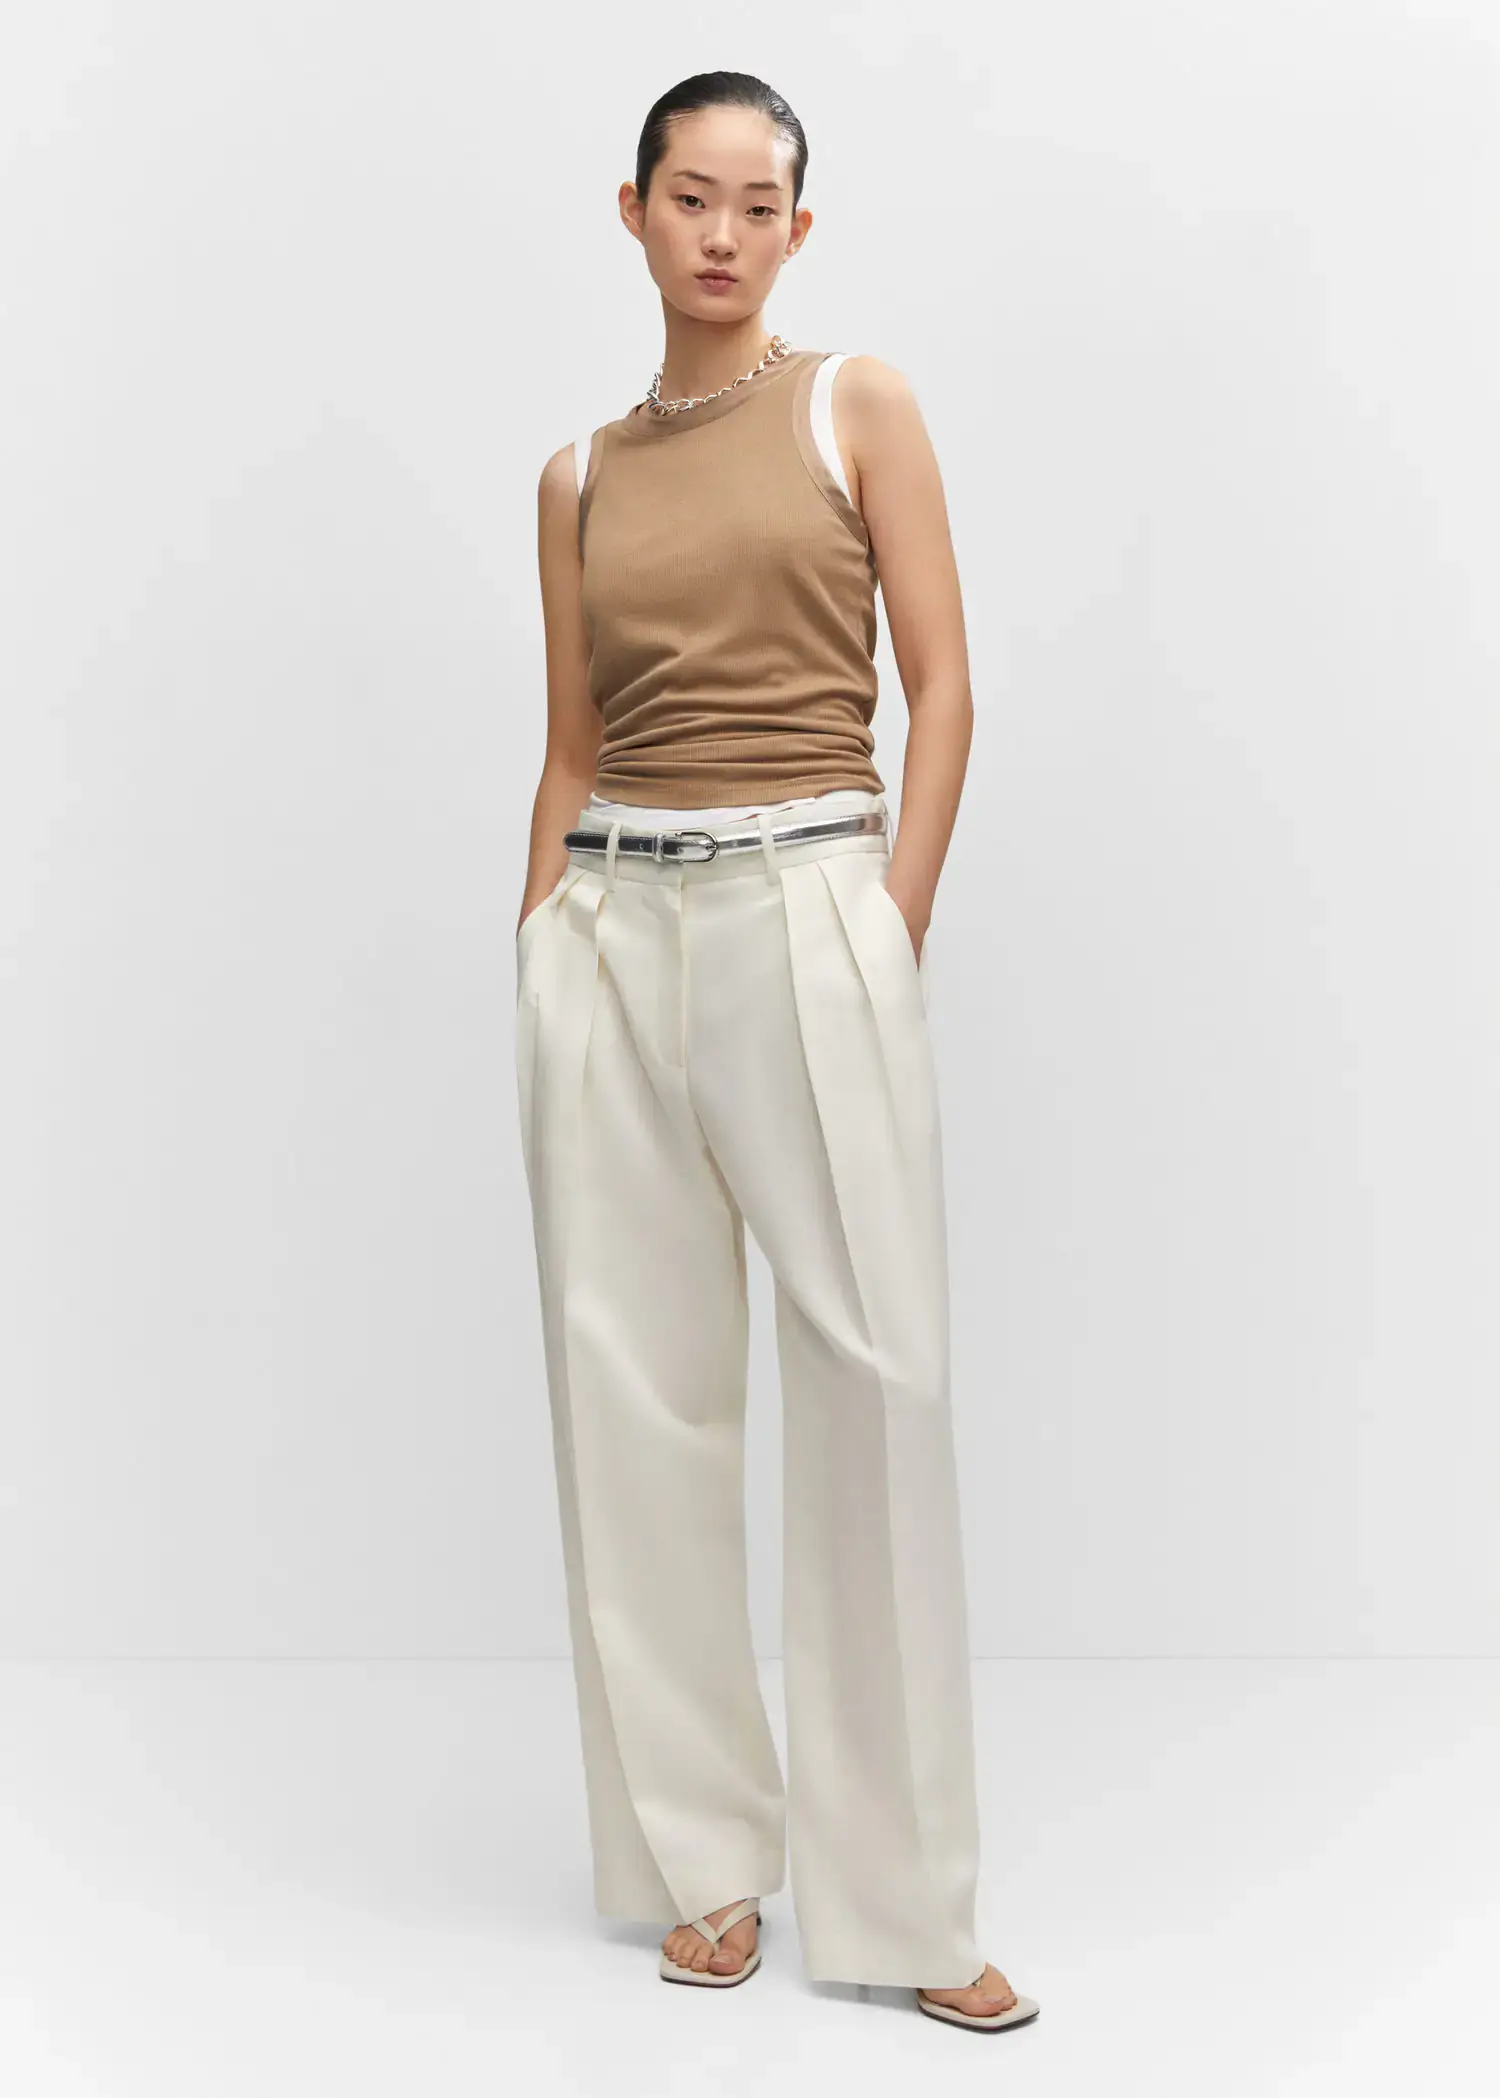 Mango Wideleg pleated trousers. a woman in a tan tank top and white pants. 